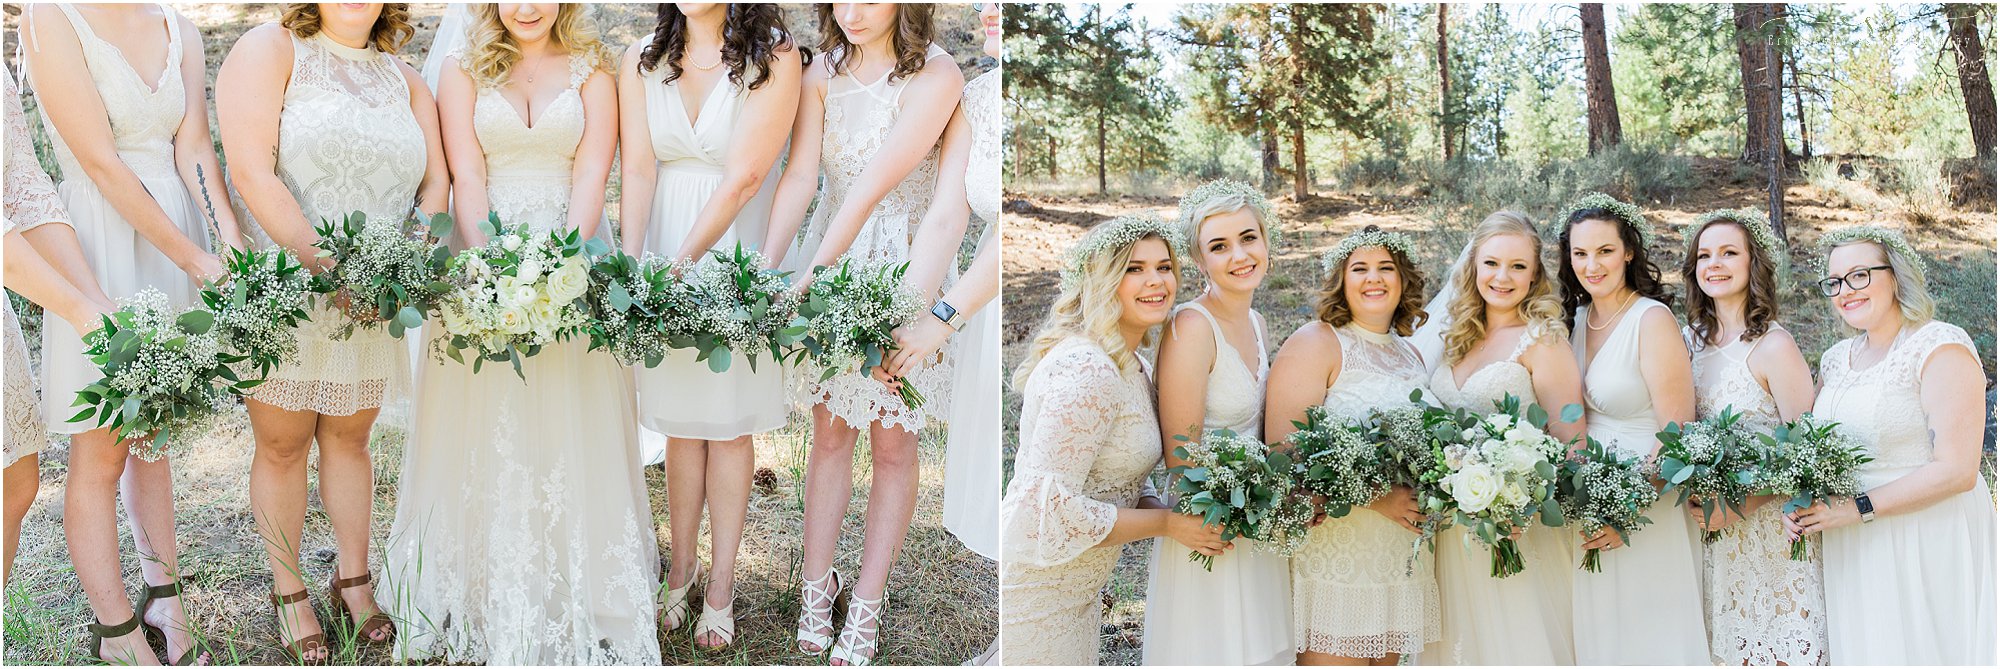 Bridesmaids all wearing shades of cream with baby's breath floral crowns fit this vintage rustic chic Bend wedding at Aspen Hall by Erica Swantek Photography. 